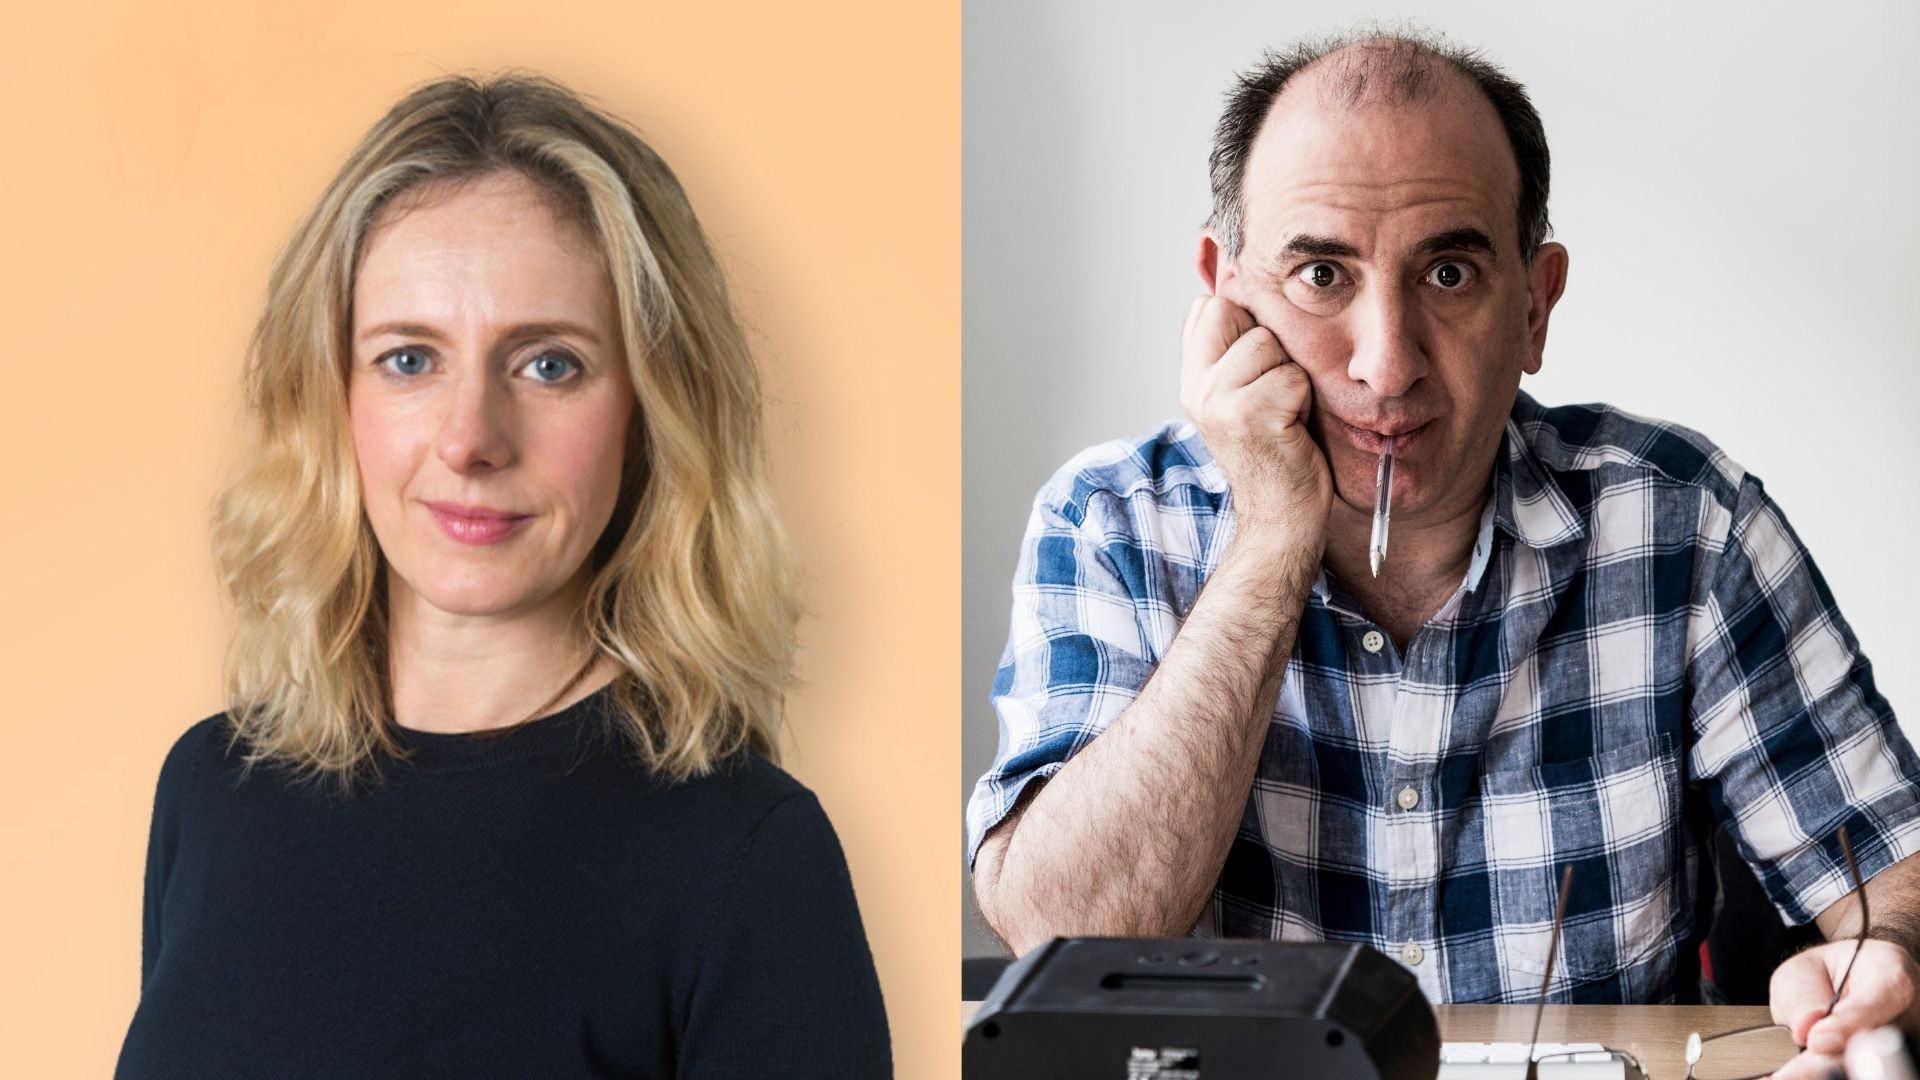 Left, a photo of a white woman with blonde hair wearing a black shirt, Marina Hyde. Right, a white man sat at a desk in a checked shirt, with a pen in his mouth